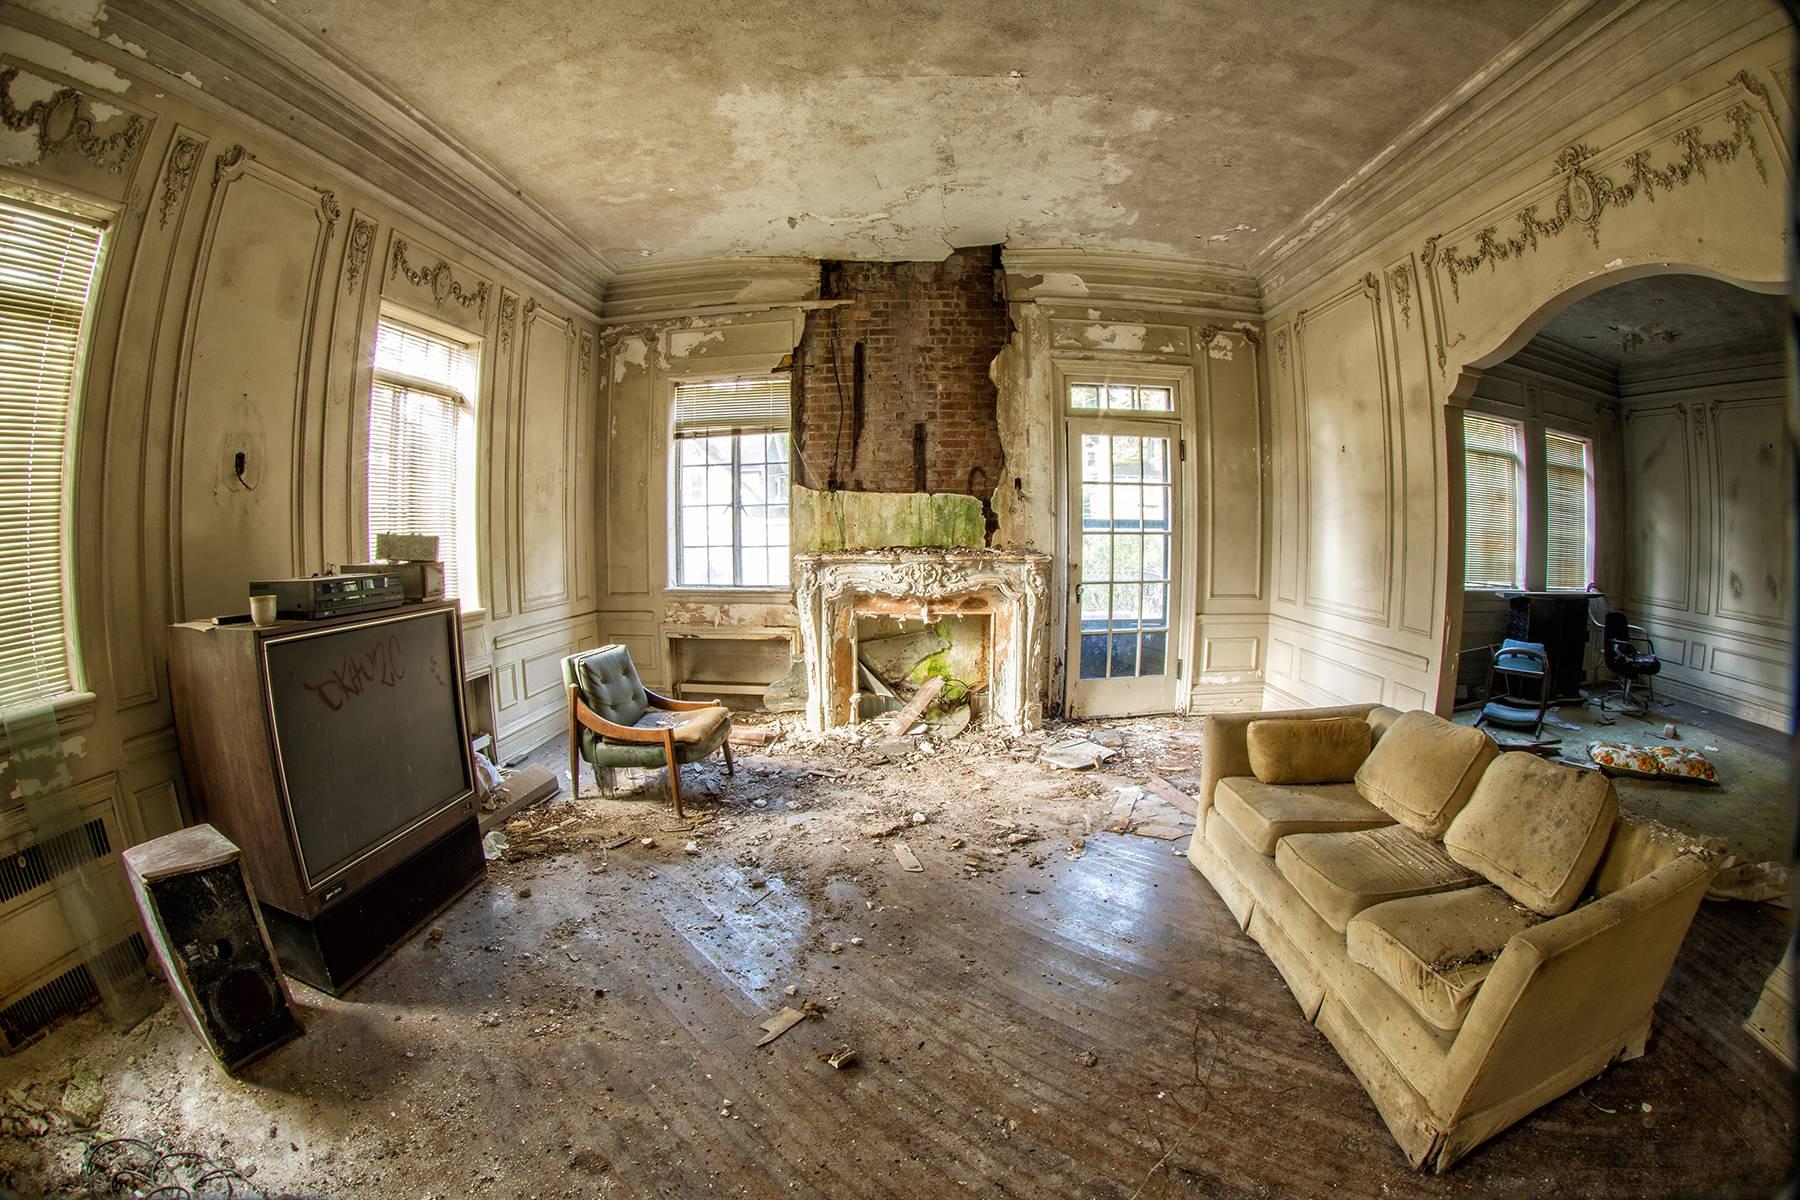 "Vacated", abandoned, home, living room, beige, metal print, color photograph - Photograph by Rebecca Skinner